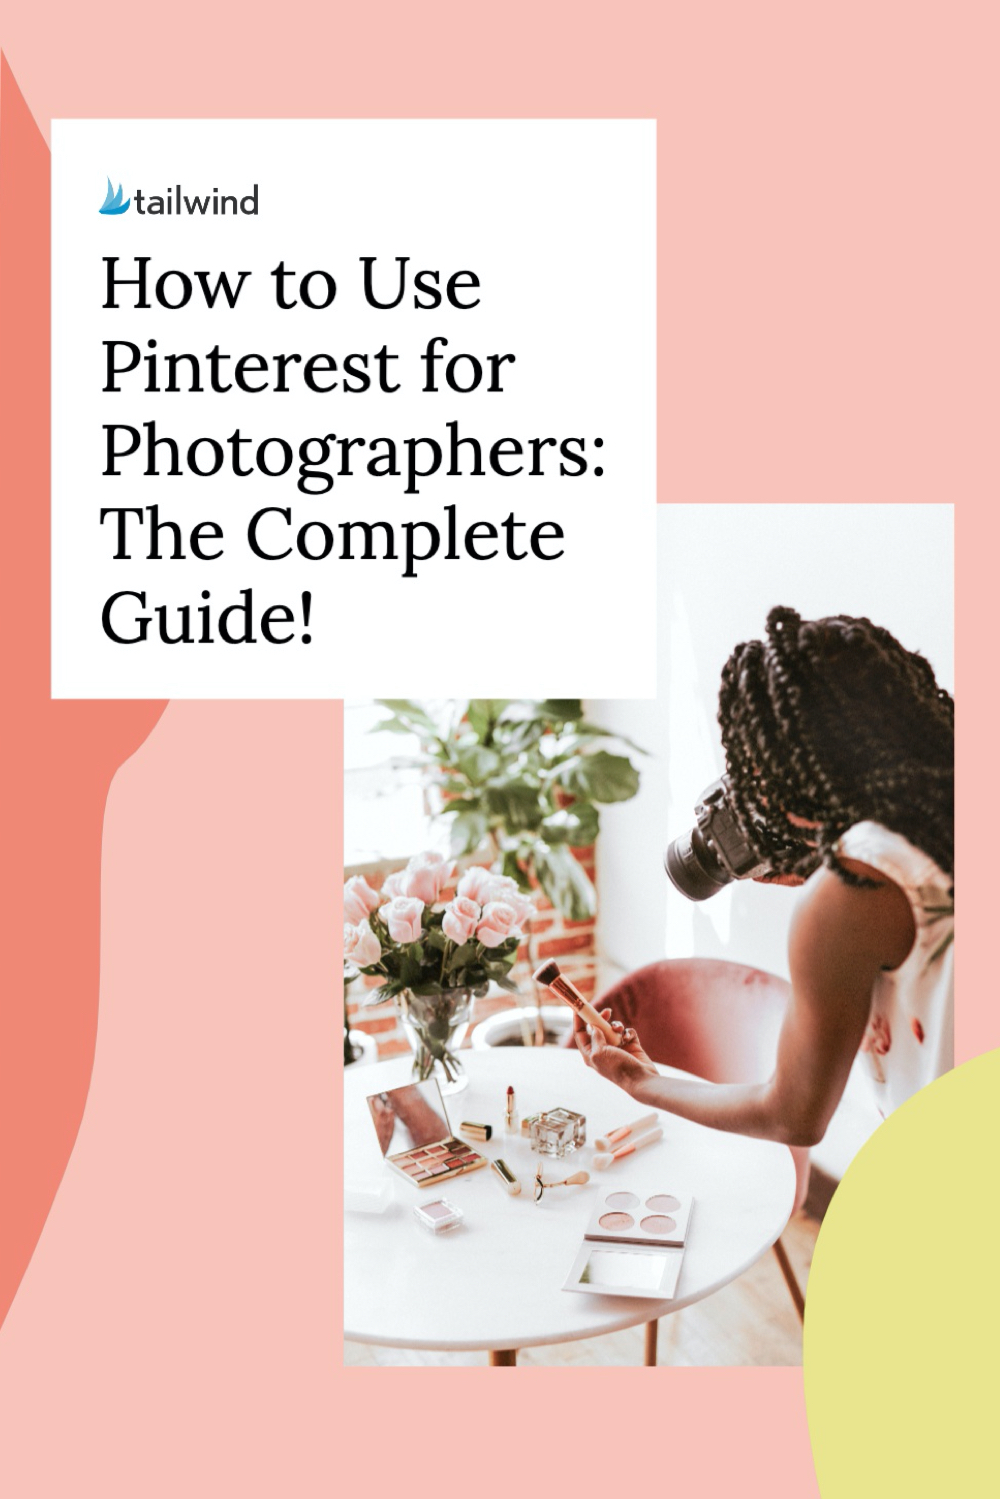 A Guide for How to Use Pinterest for Photographers | Tailwind App